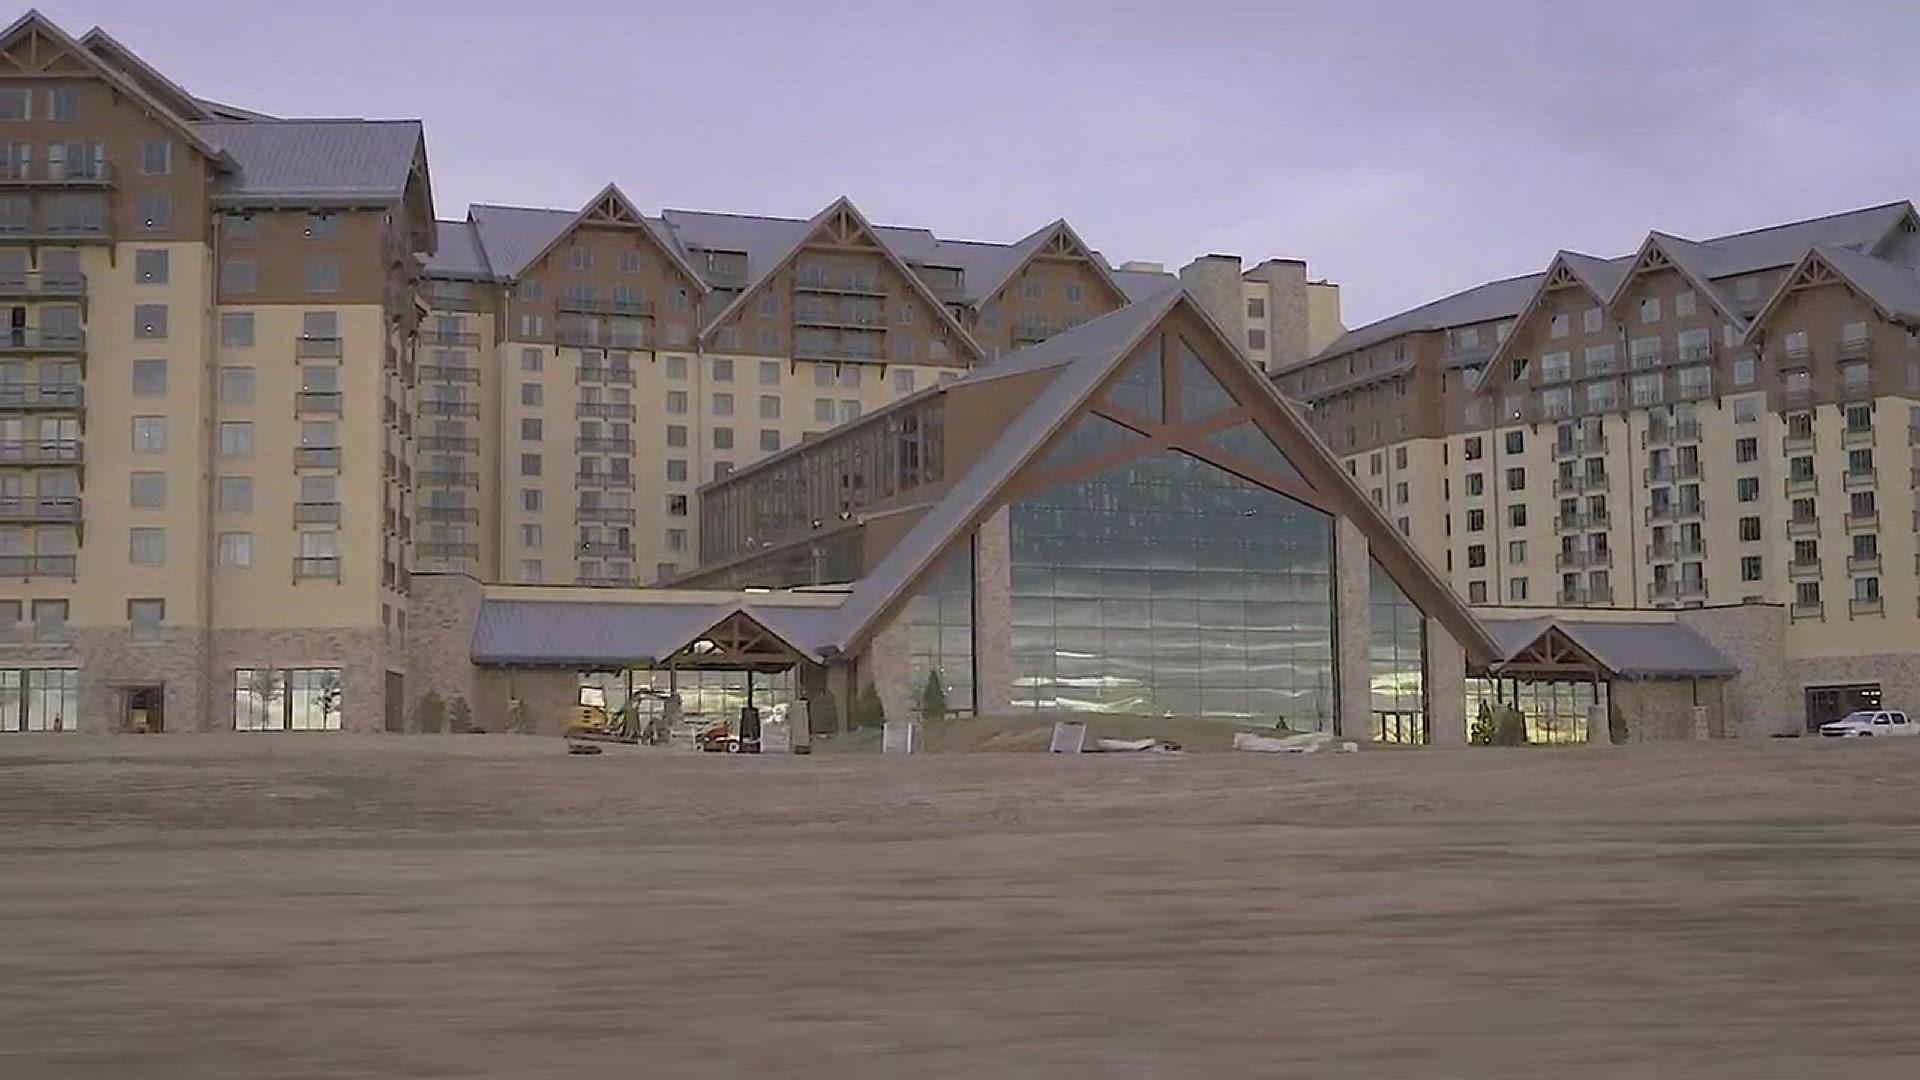 The Gaylord Rockies Resort and Convention Center is one massive convention center. Here's a look inside before it opens in just a few weeks.